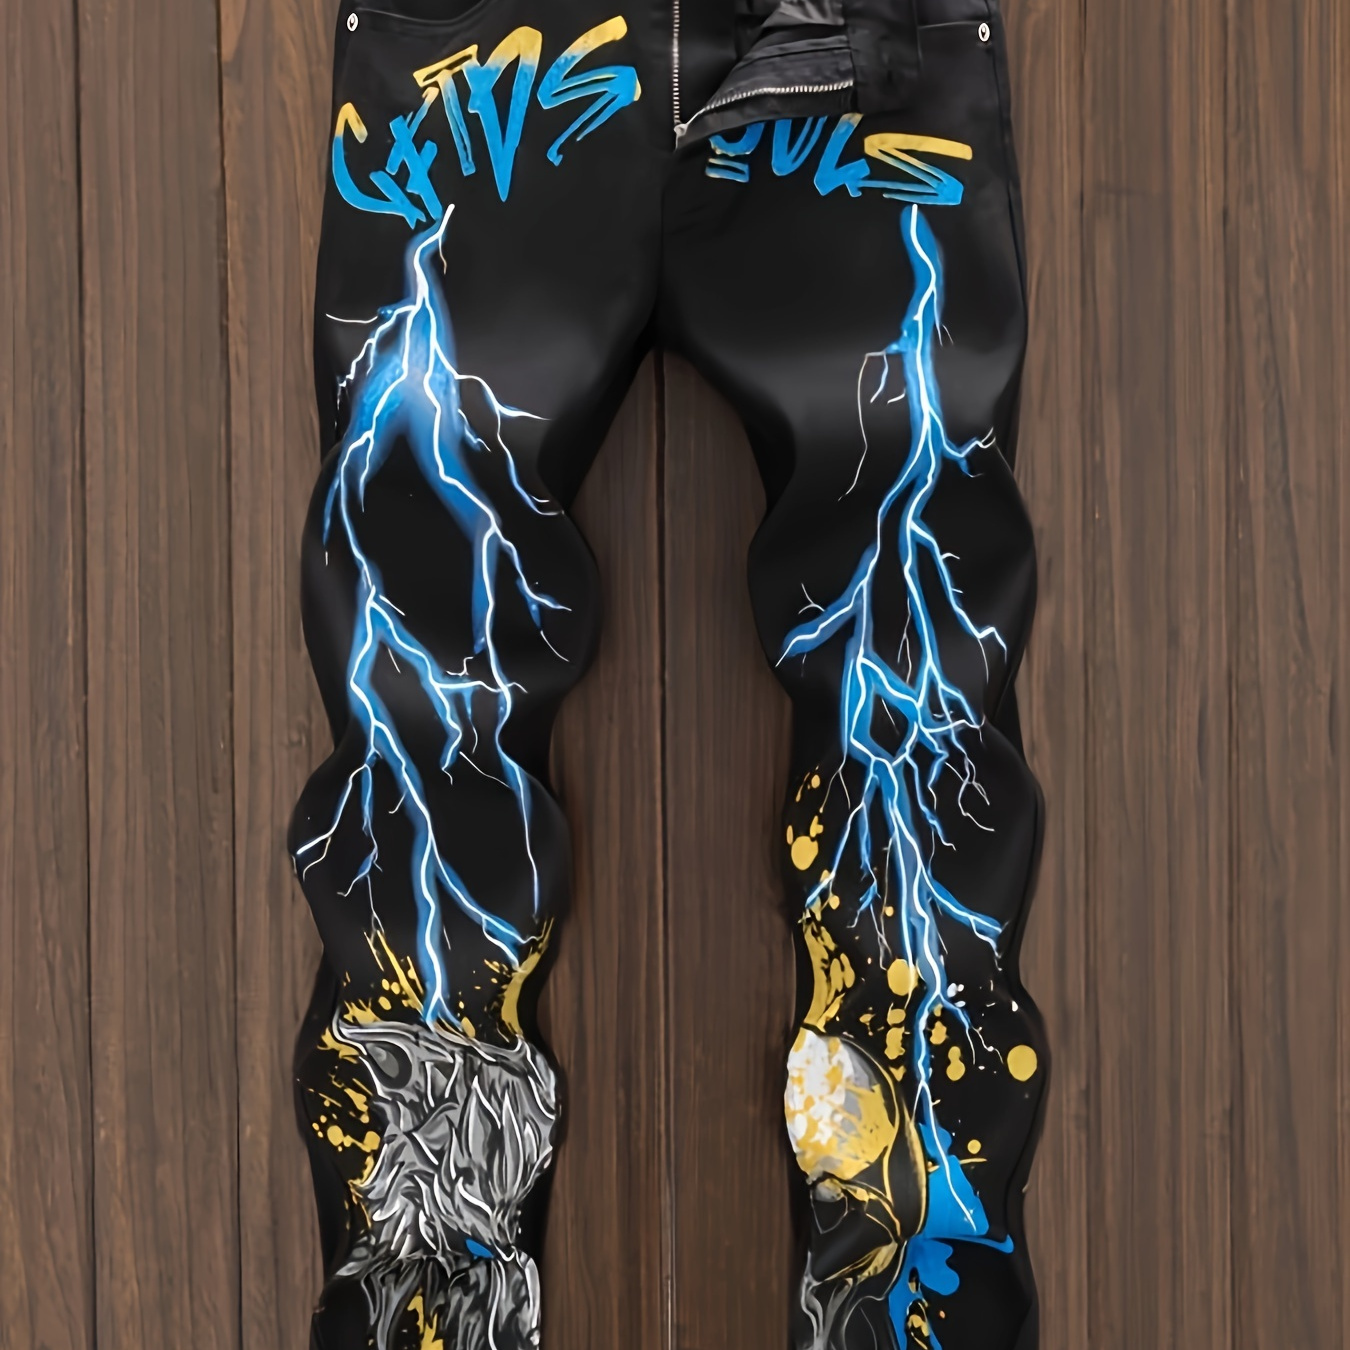 

Men's Graffiti Style Golf And Pattern And Letter Print Denim Jeans With Pockets, Cool And Stylish Slim Fit Cuffed Pants For Men's Street Wear